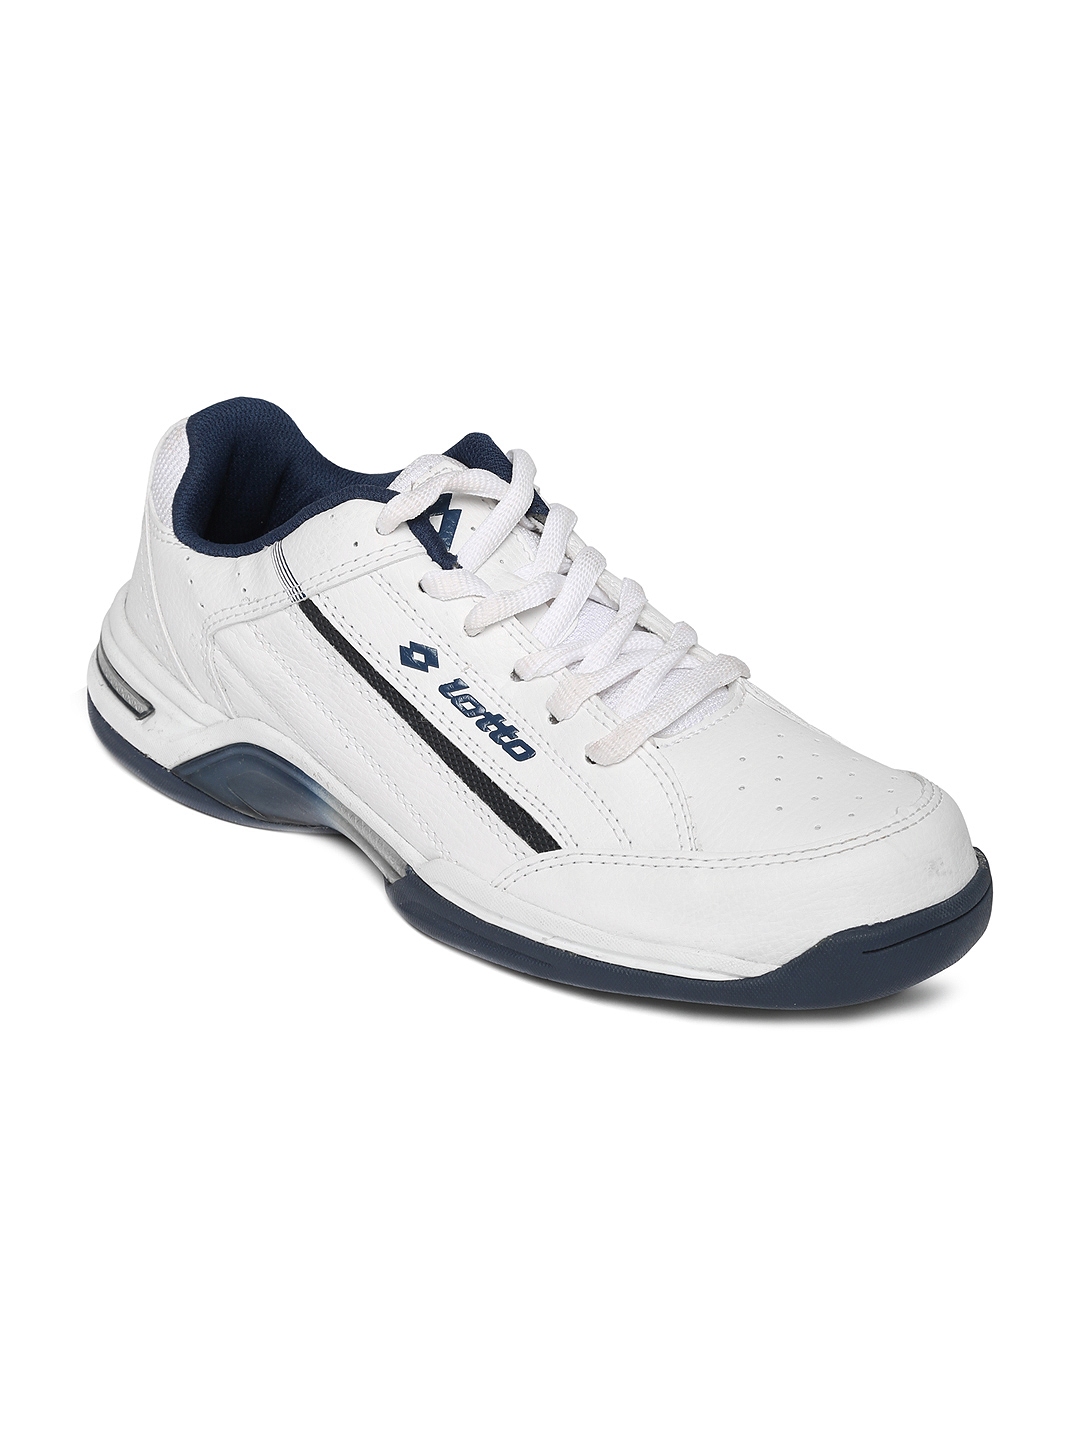 Buy Lotto Men White Classica III Sports Shoes - Sports Shoes for Men ...